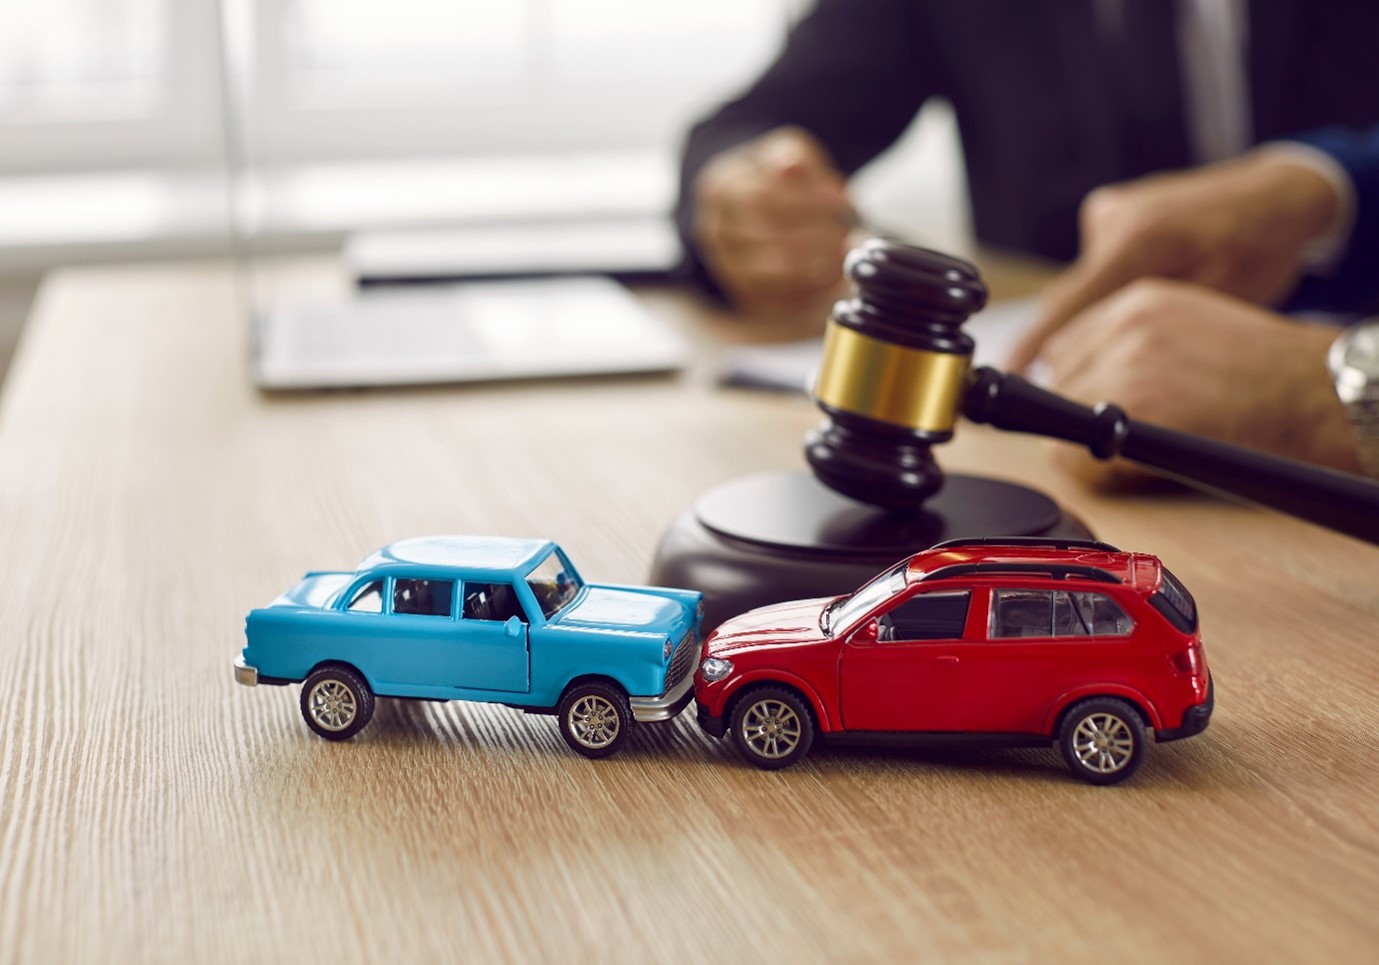 Determining Fault in A Car Accident in Ontario